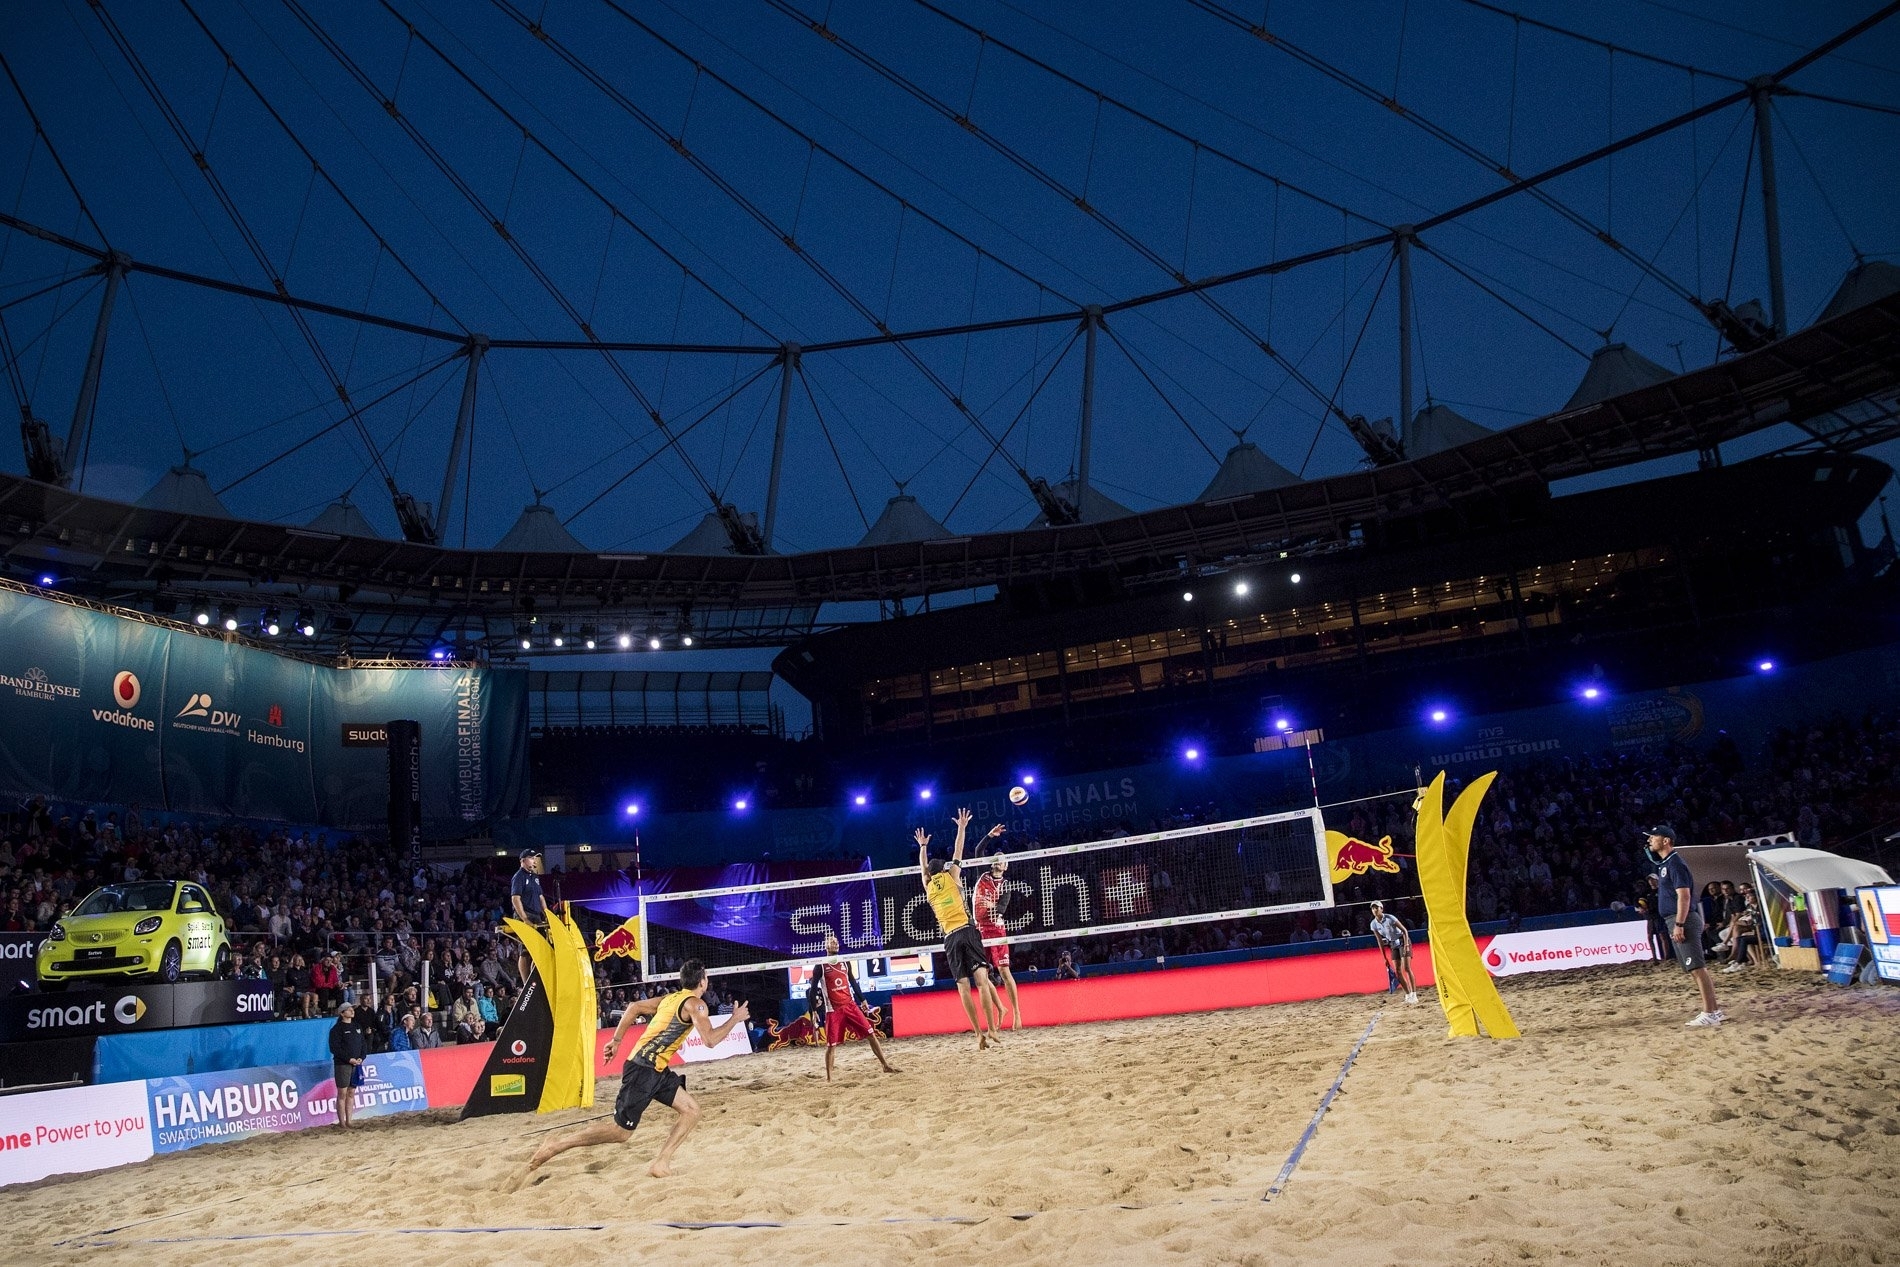 A big crowd gathered to watch the penultimate game of day two at the Red Bull Beach Arena